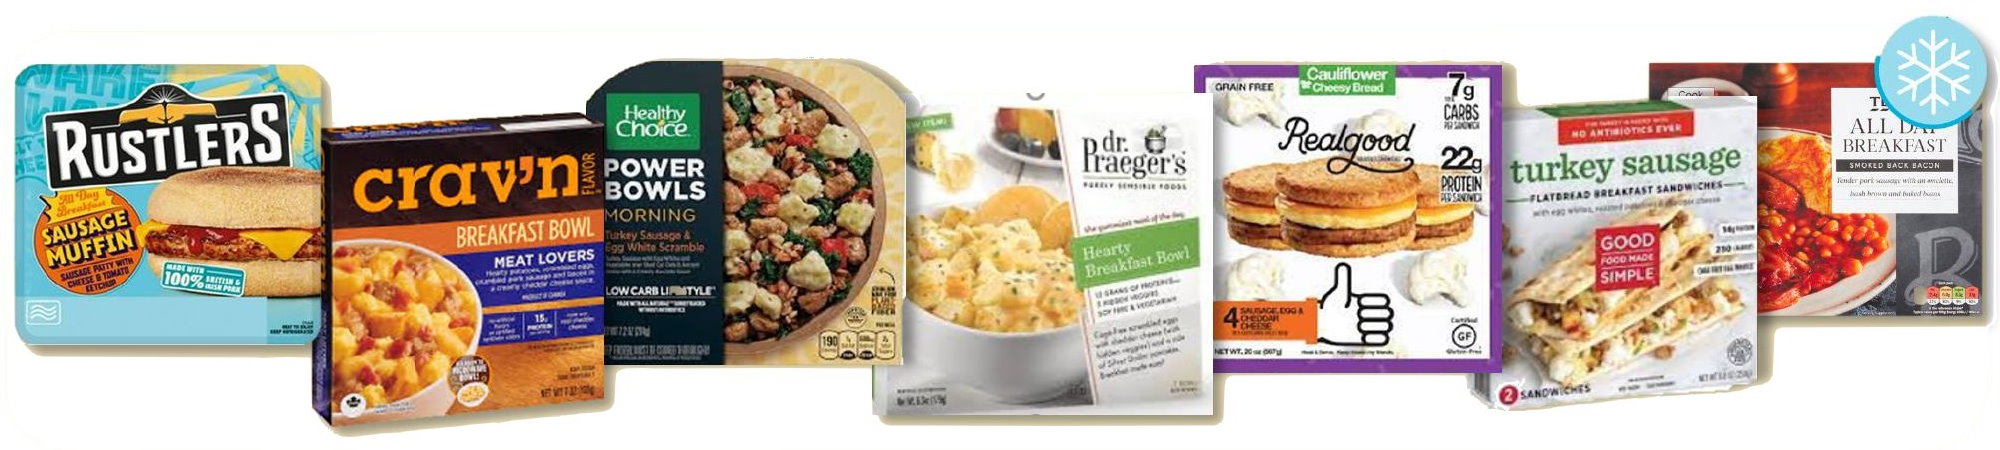 The microwavable, convenience-based foods from the overseas market